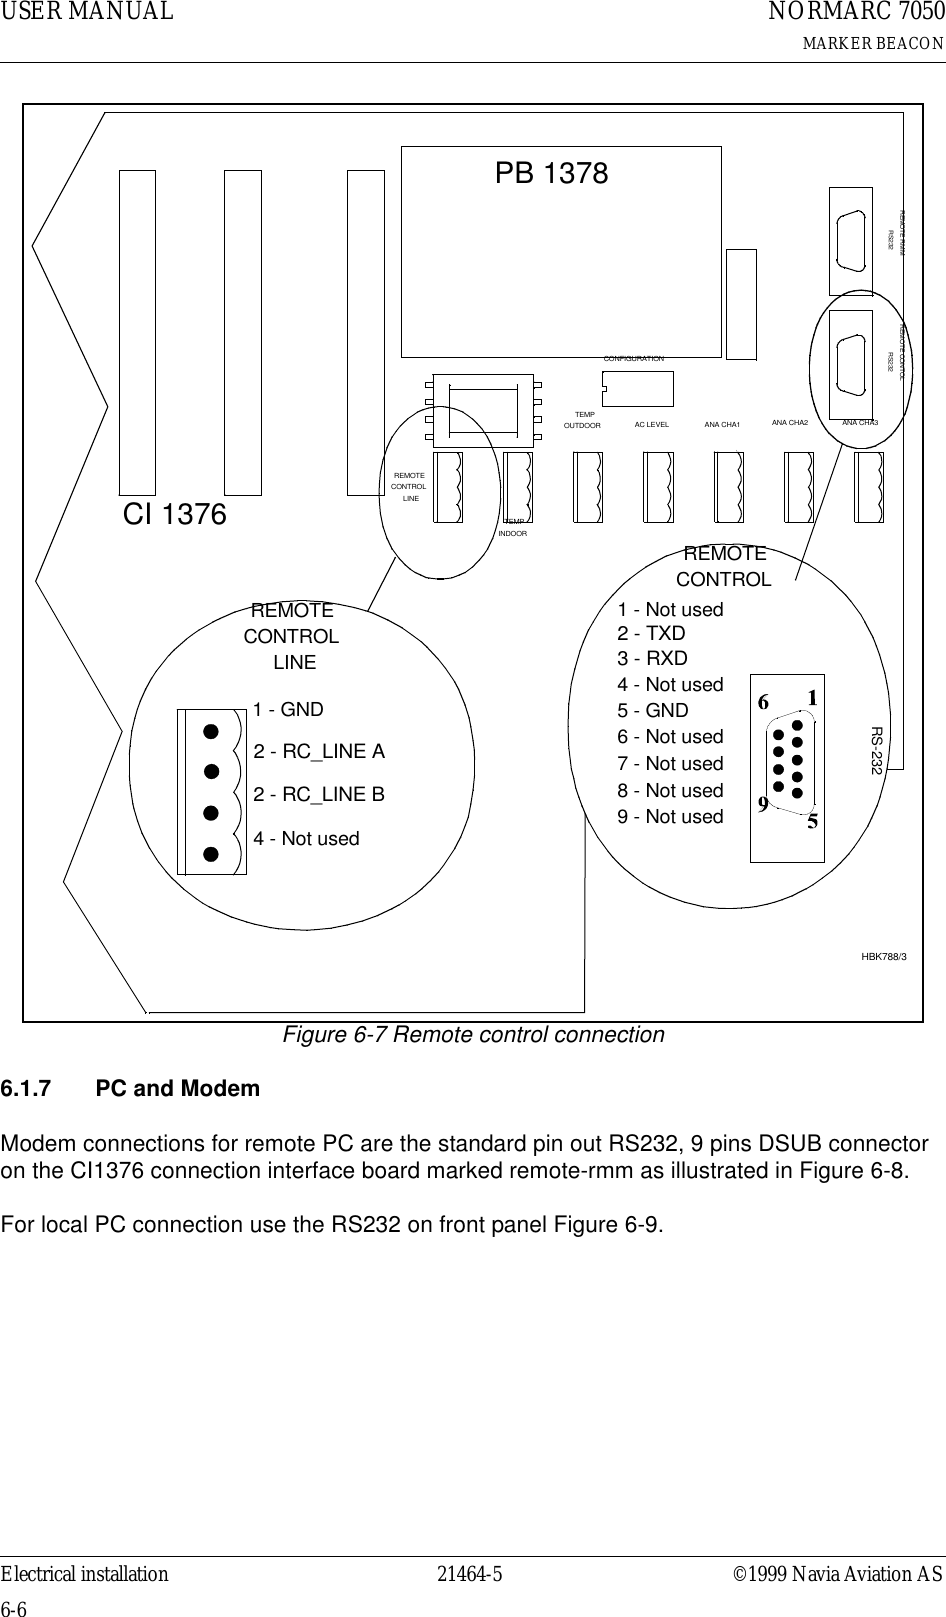 USER MANUAL6-621464-5NORMARC 7050MARKER BEACONElectrical installation ©1999 Navia Aviation AS Figure 6-7 Remote control connection6.1.7  PC and ModemModem connections for remote PC are the standard pin out RS232, 9 pins DSUB connector on the CI1376 connection interface board marked remote-rmm as illustrated in Figure 6-8.For local PC connection use the RS232 on front panel Figure 6-9.CI 1376PB 1378REMOTECONTROLLINETEMPOUTDOORTEMPINDOORAC LEVEL ANA CHA1 ANA CHA2 ANA CHA3REMOTE RMMRS232REMOTE CONTOLRS232CONFIGURATION1 - GND2 - RC_LINE B4 - Not used1 - Not used3 - RXD2 - TXD4 - Not used5 - GND6 - Not used7 - Not used8 - Not used9 - Not usedREMOTECONTROLREMOTECONTROLLINERS-232HBK788/32 - RC_LINE A